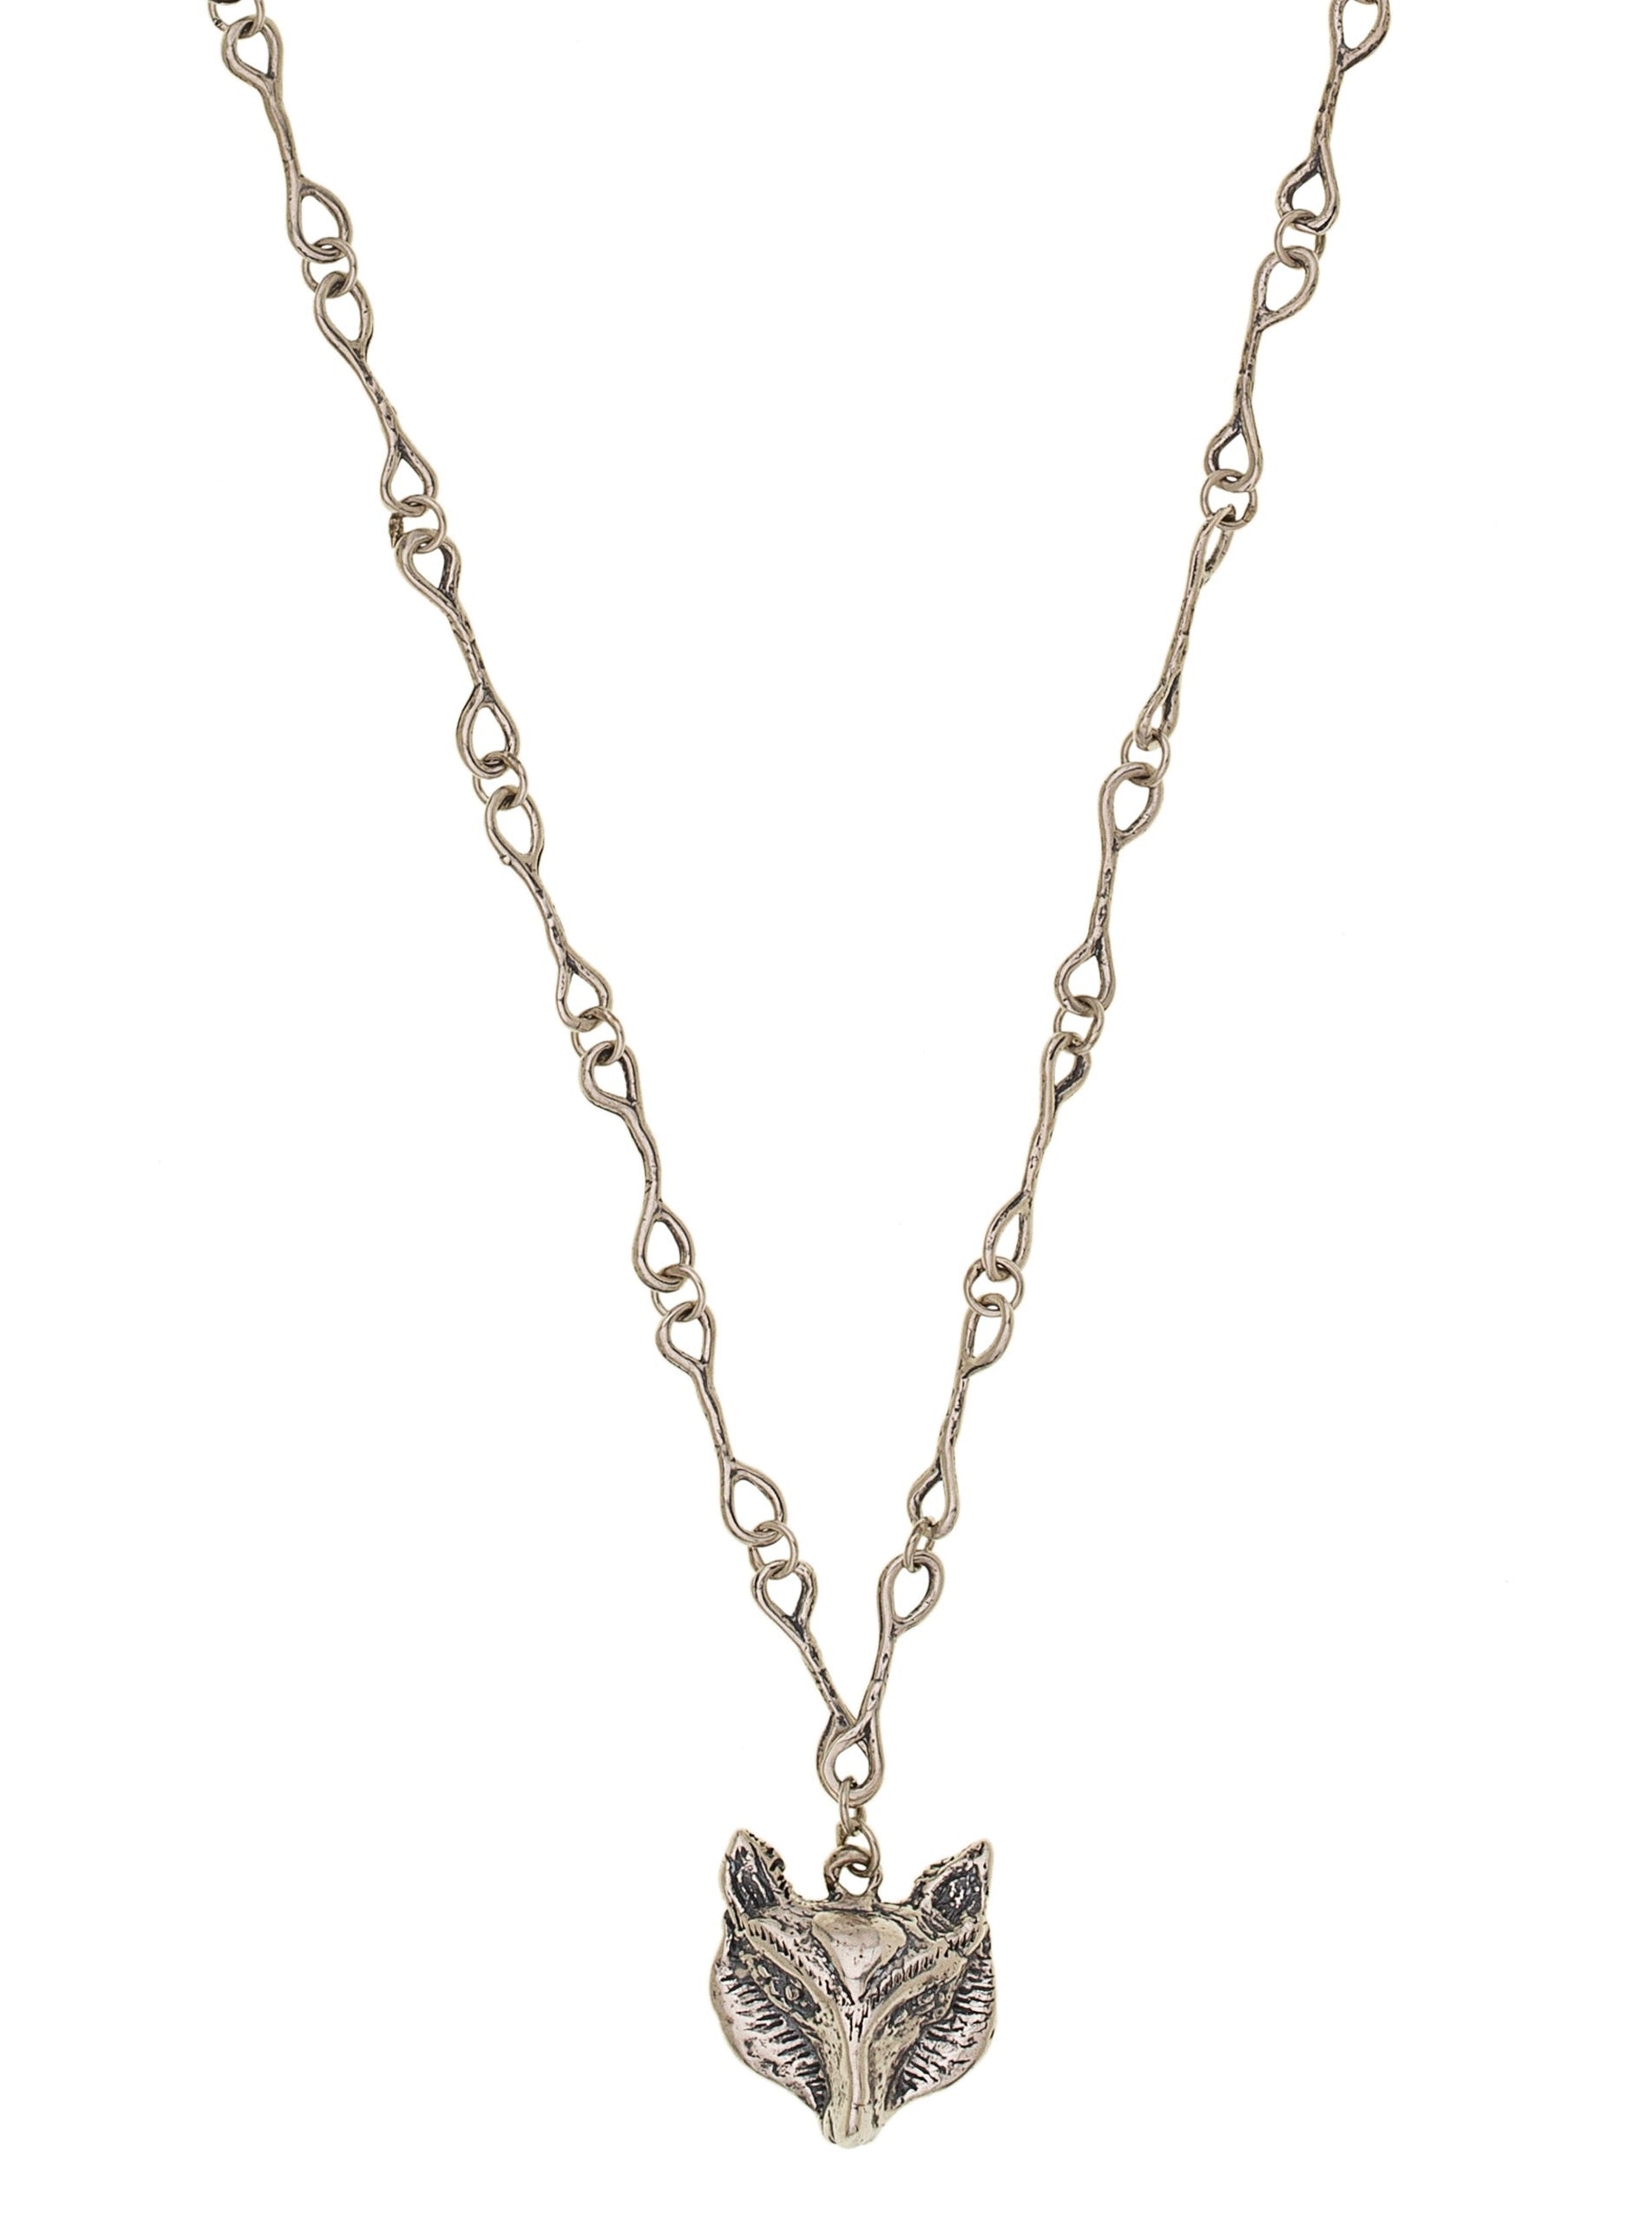 The Fox Necklace